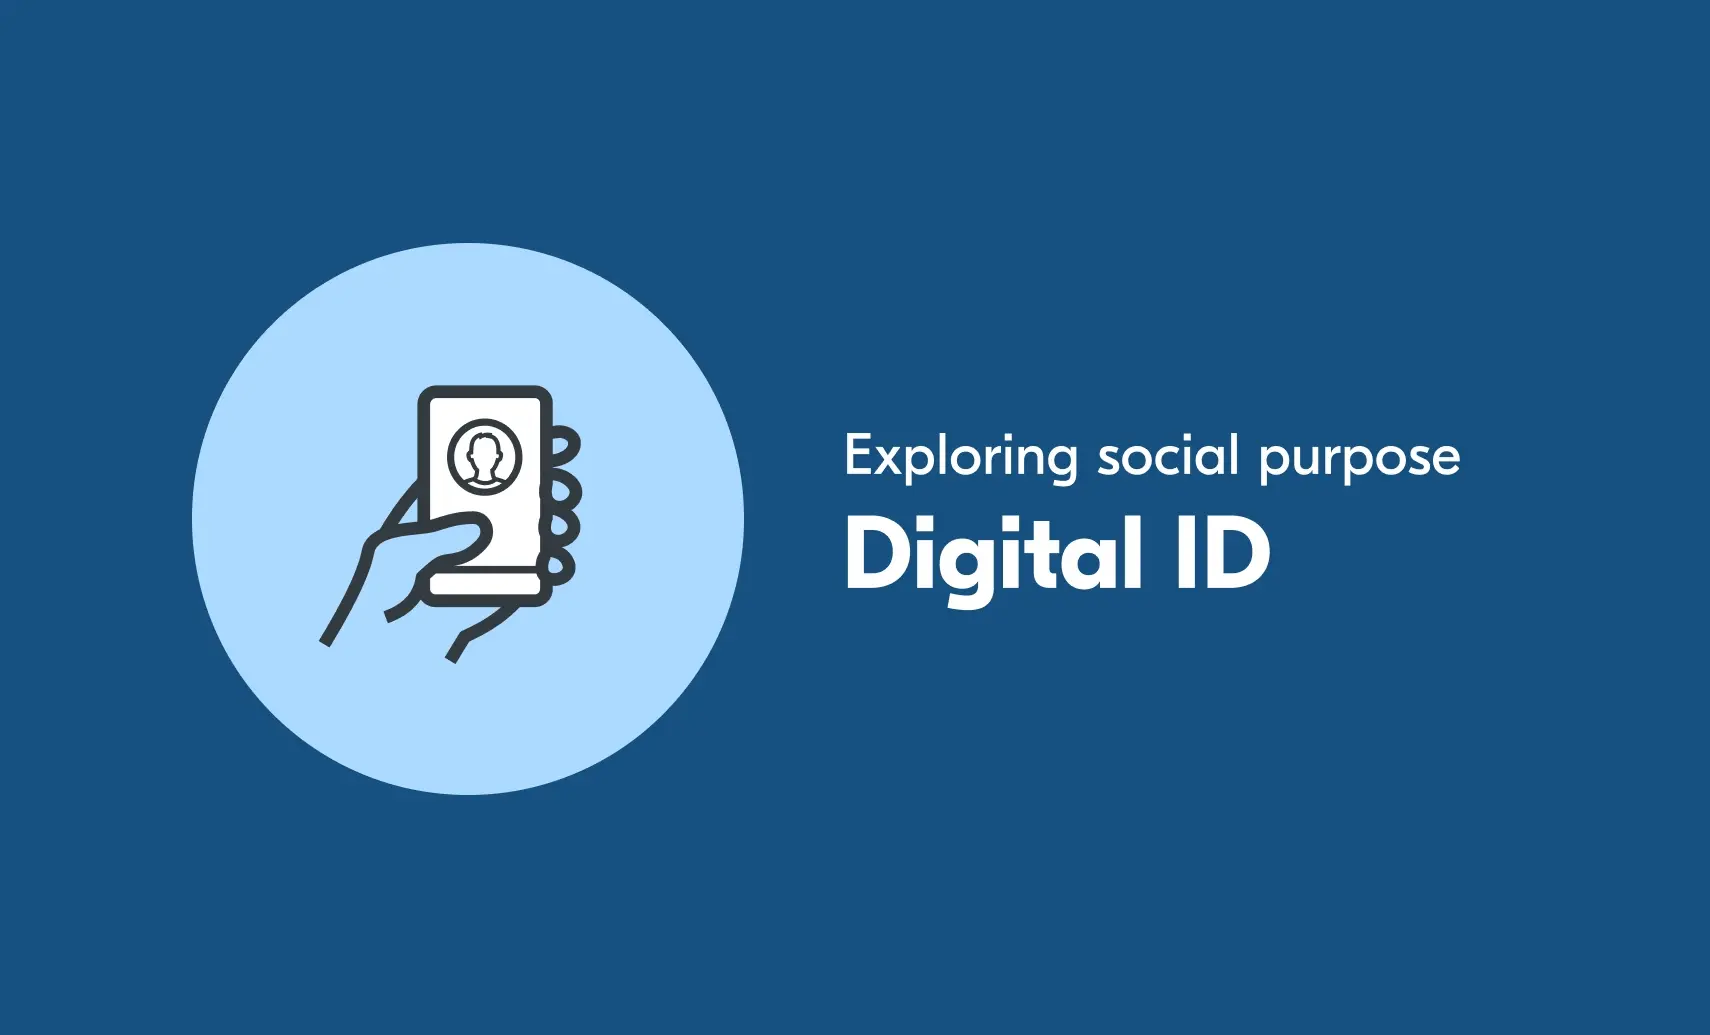 An illustration of a Digital ID app. The accompanying text says "Exploring social purpose: Digital ID".